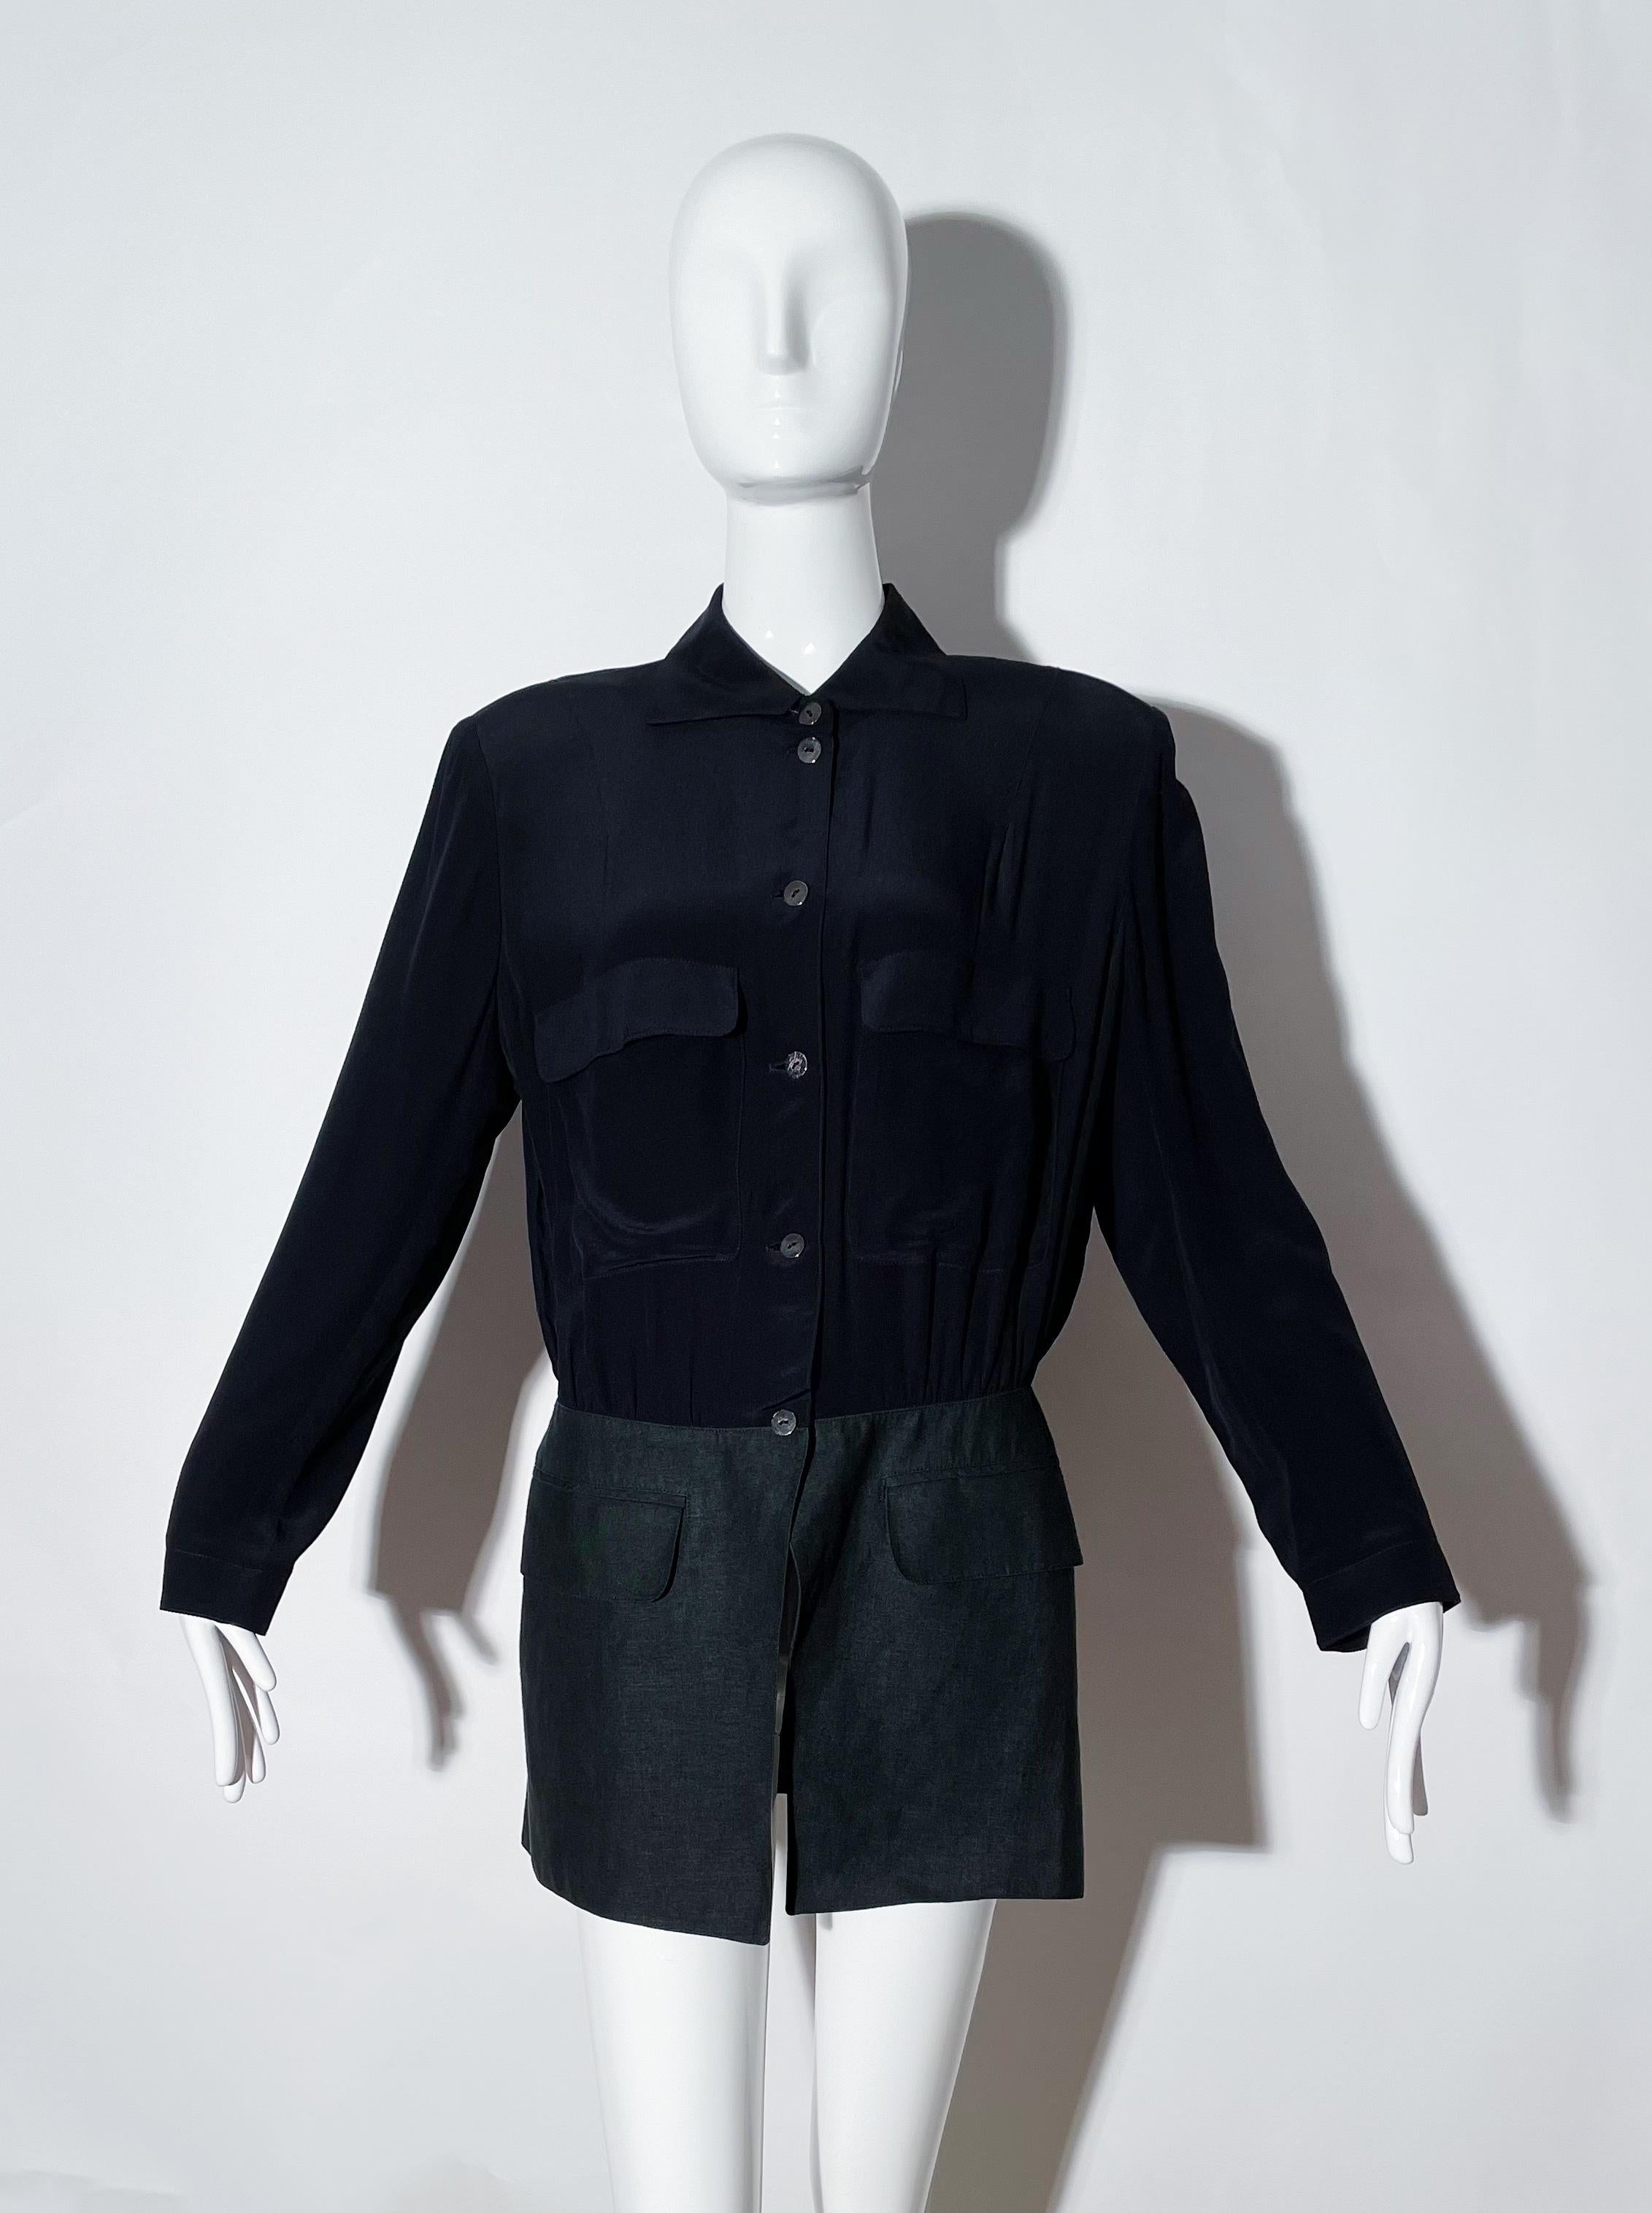 Black blouse. Button down. Front pockets. Collared. Silk and linen. Made in Italy. 
*Condition: Excellent vintage condition. No visible Flaws.

Measurements Taken Laying Flat (inches)—
Shoulder to Shoulder: 17 in.
Sleeve Length: 24 in.
Bust: 40